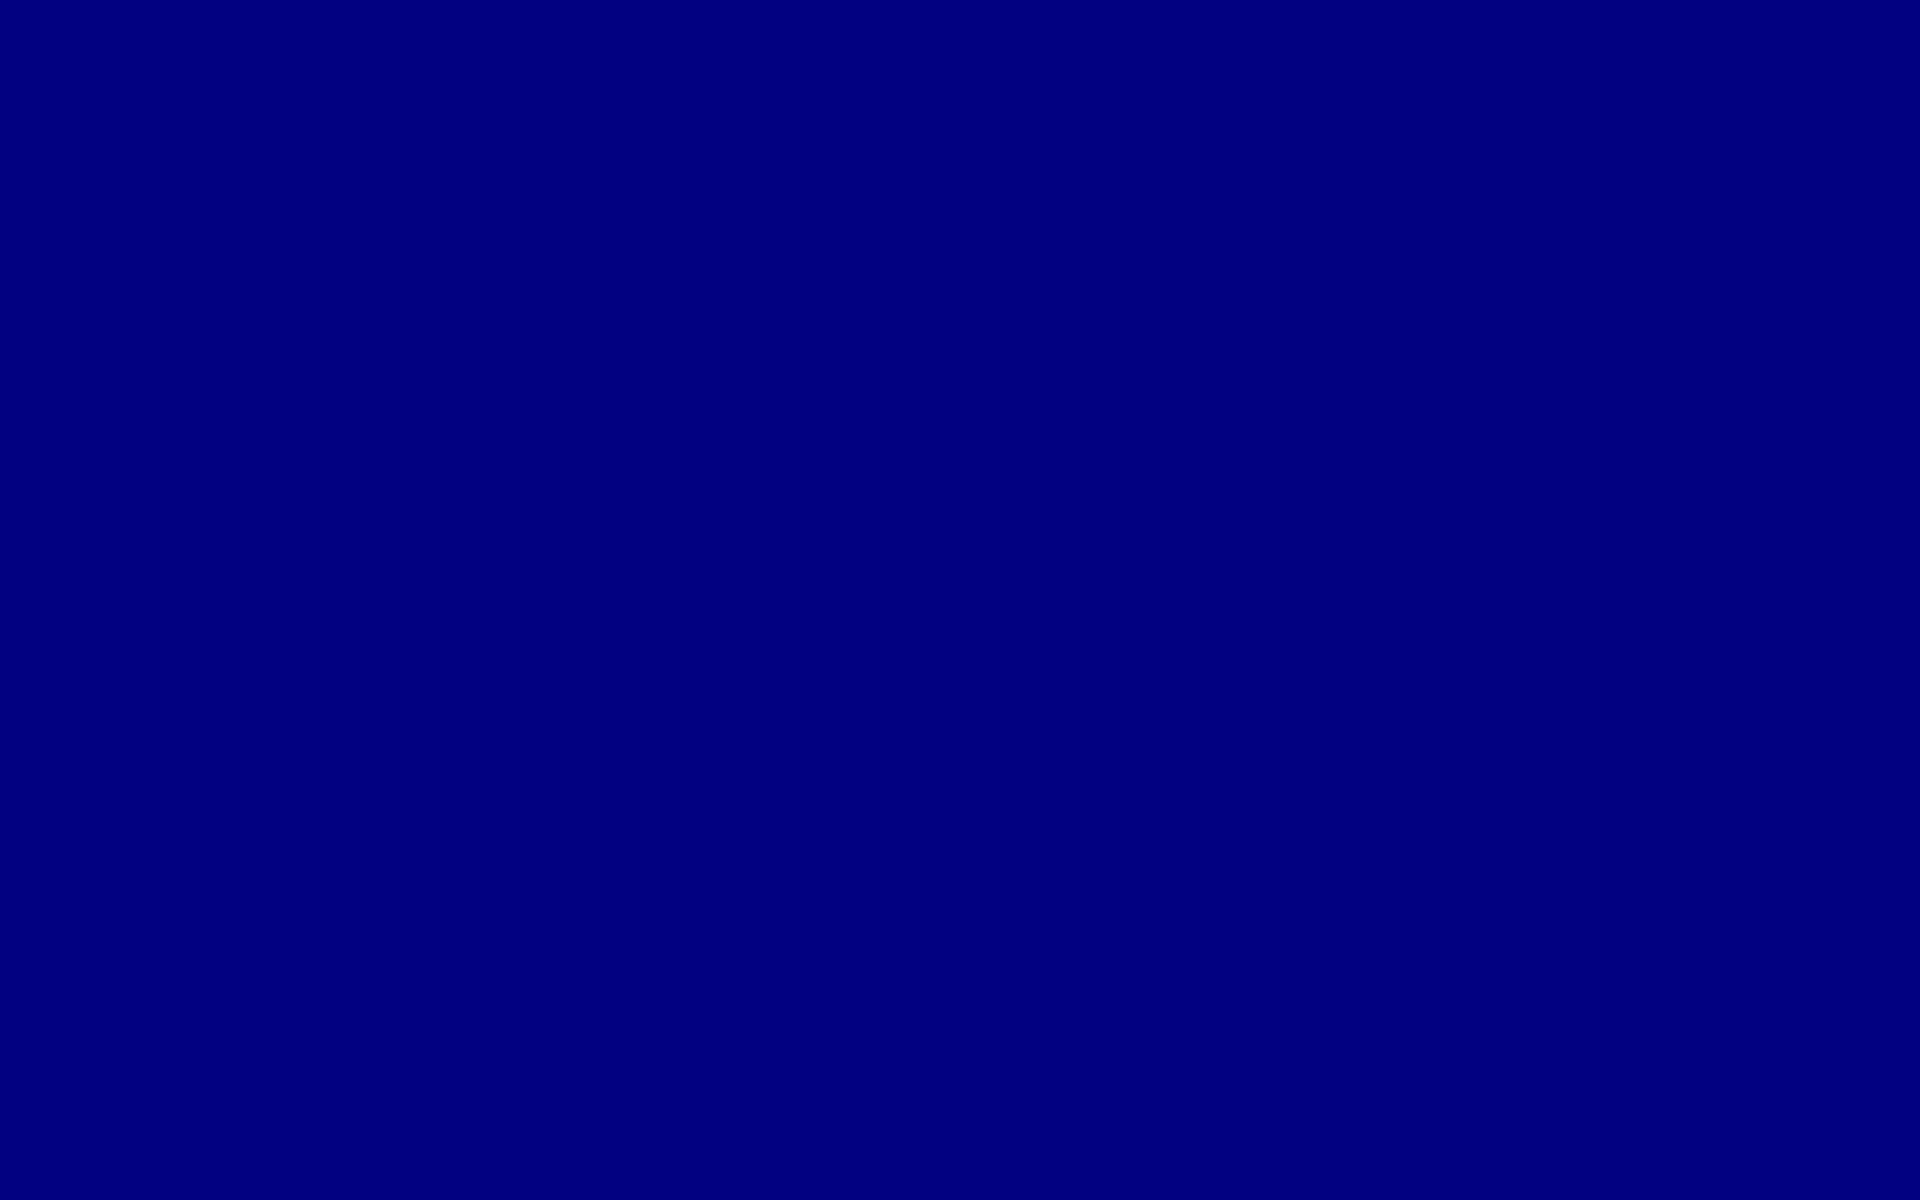 Experience Relaxation with Dark Blue Plain Wallpaper